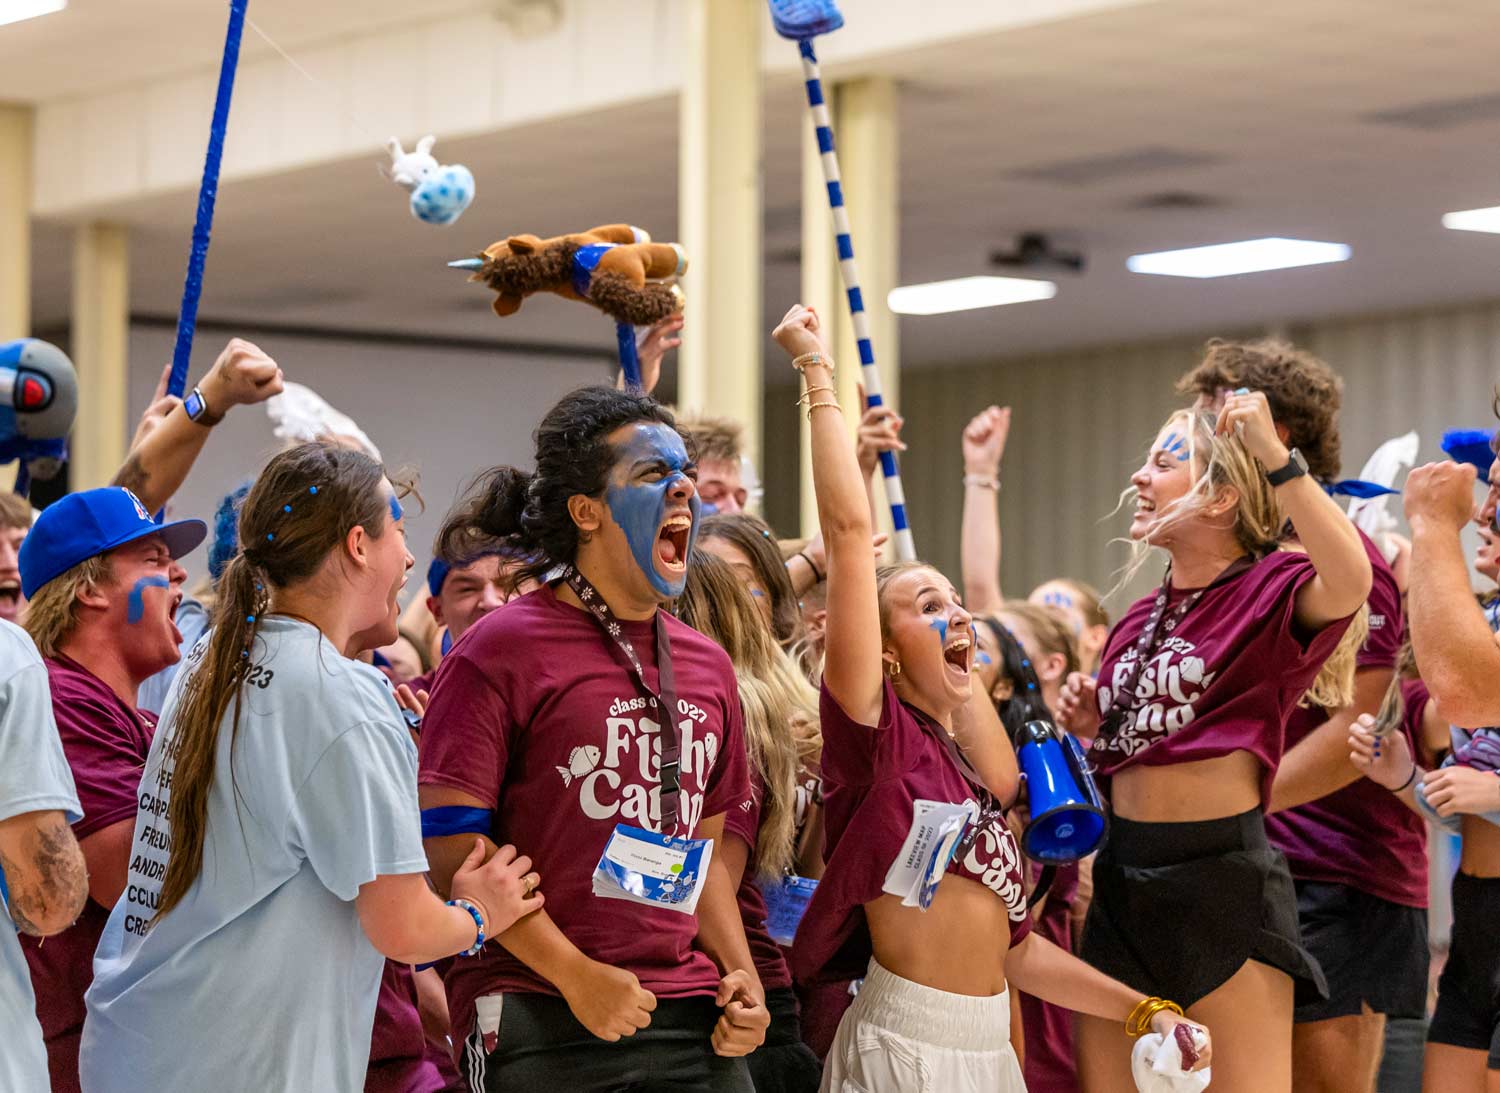 Fish Camp counselors and students participate in the yell-off at camp